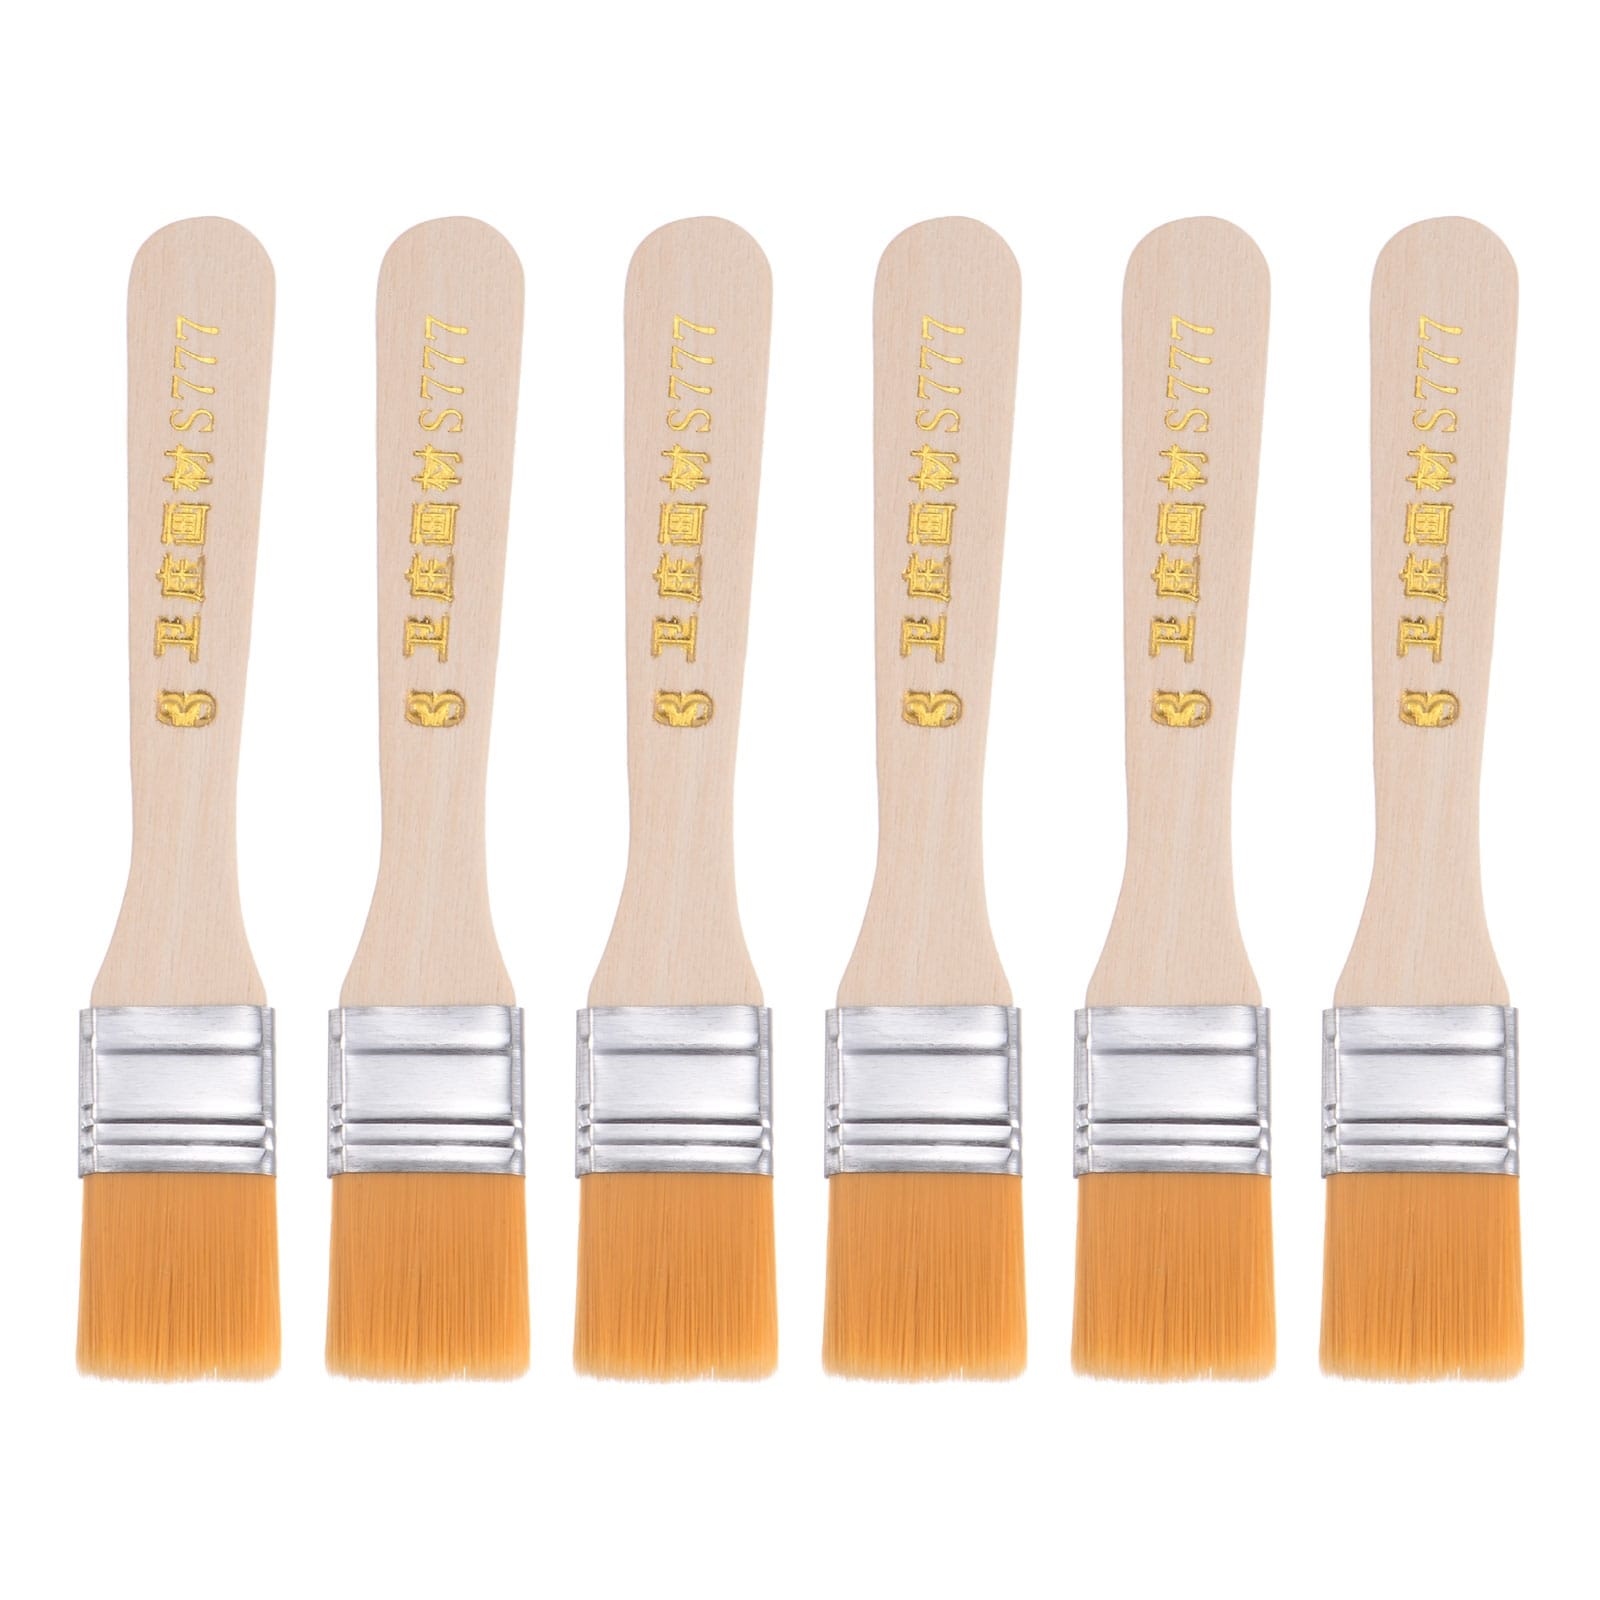 0.9 Width Small Paint Brush Nylon Bristle with Wood Handle Tool 6Pcs -  Yellow - Bed Bath & Beyond - 37387456